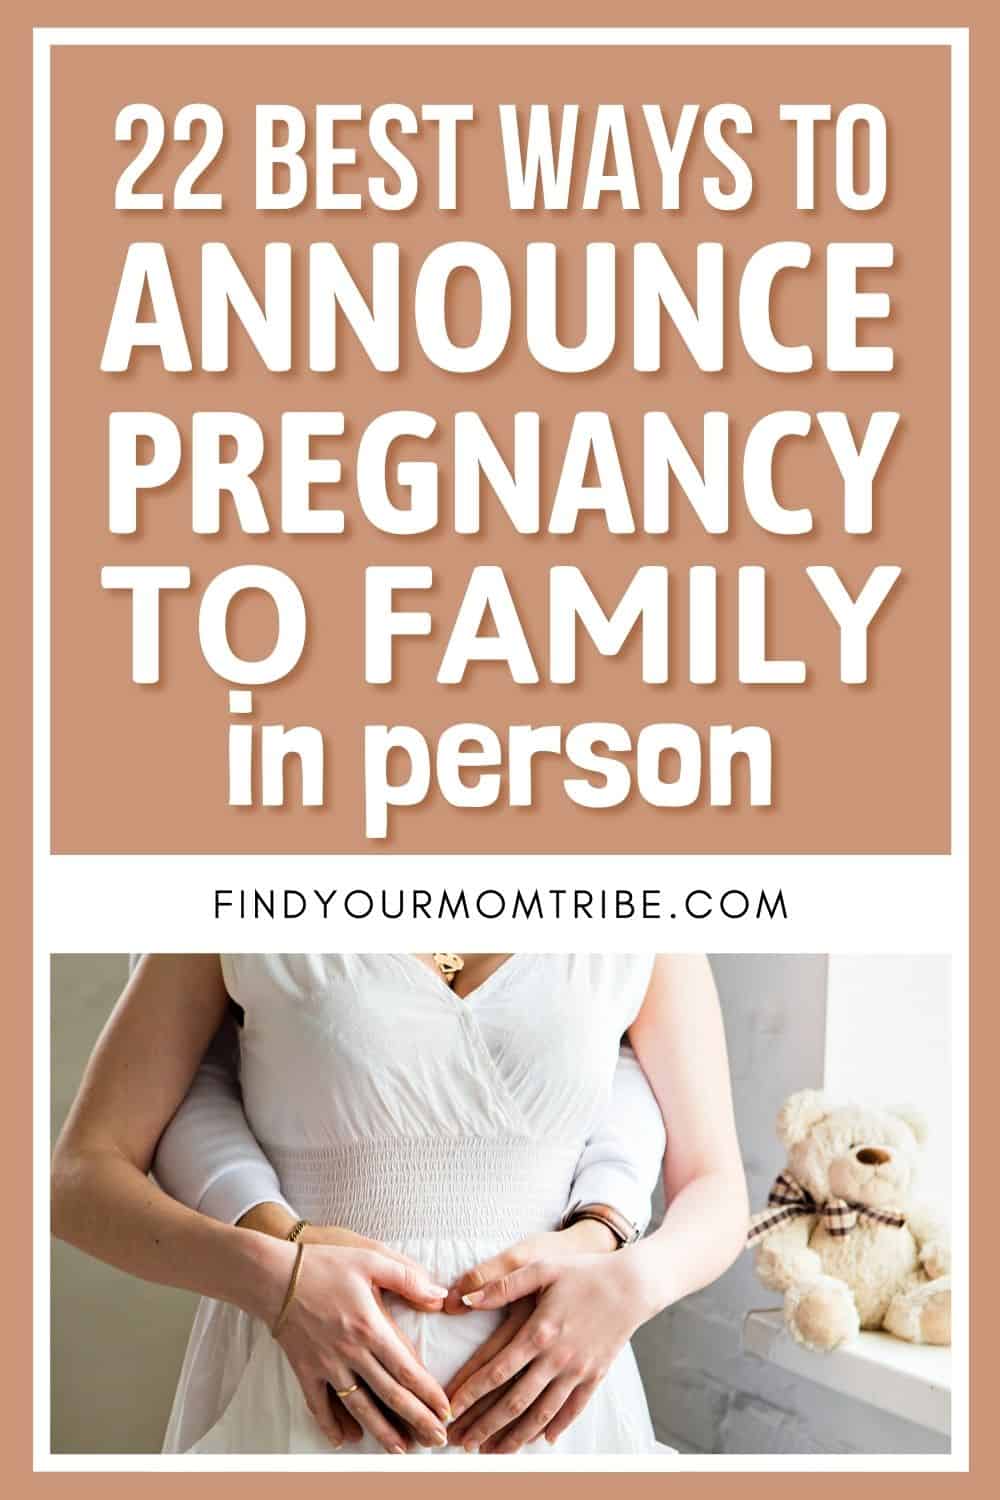 22 Best Ways To Announce Pregnancy To Family In Person Pinterest